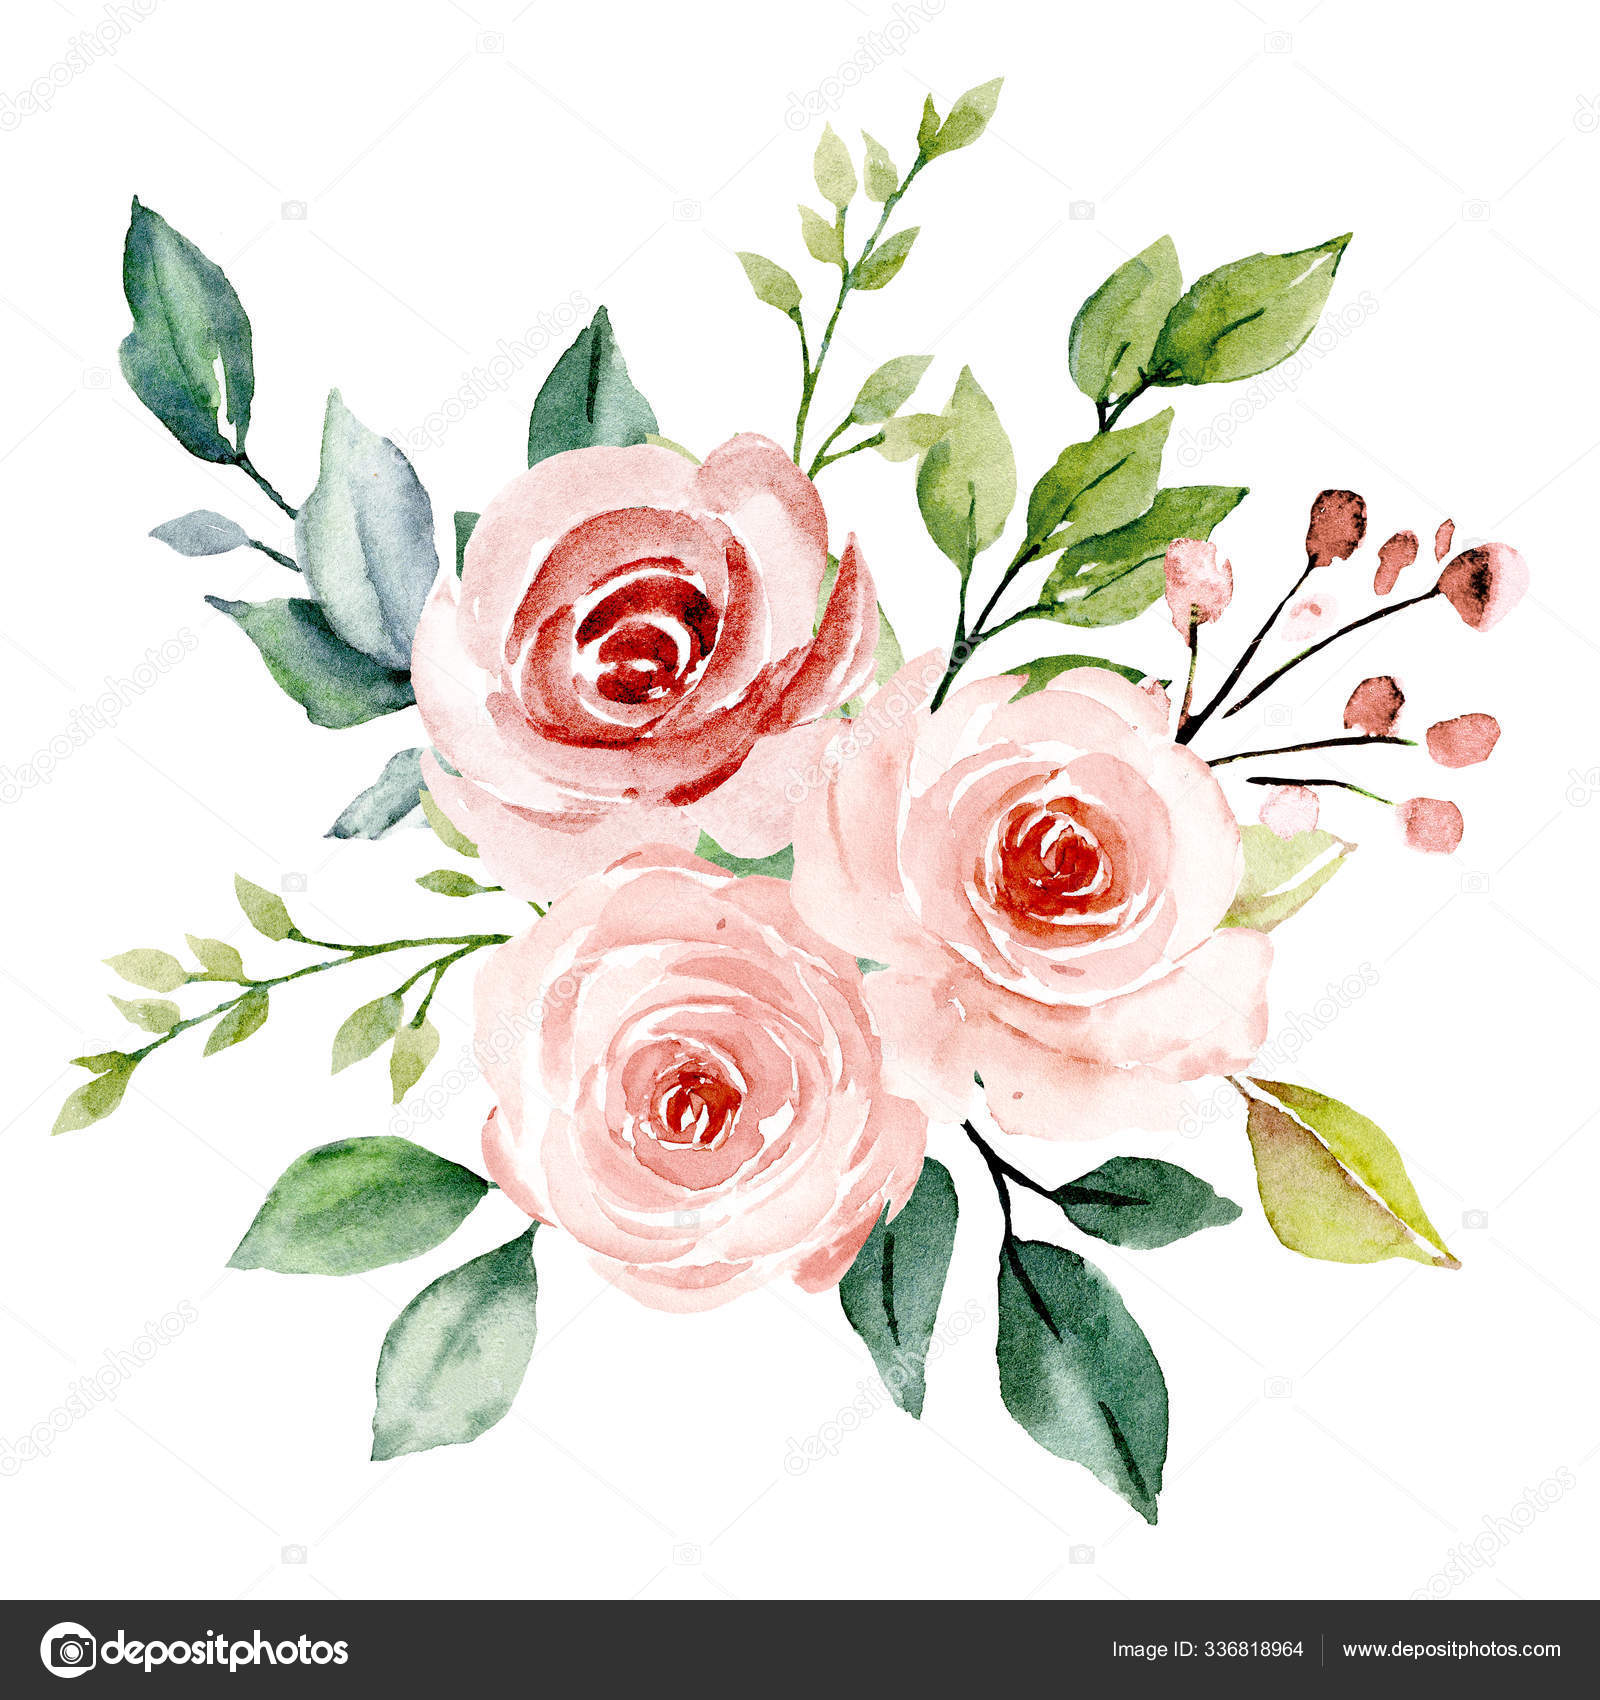 Flowers Watercolor Floral Clip Art Botanic Composition Wedding Greeting ...